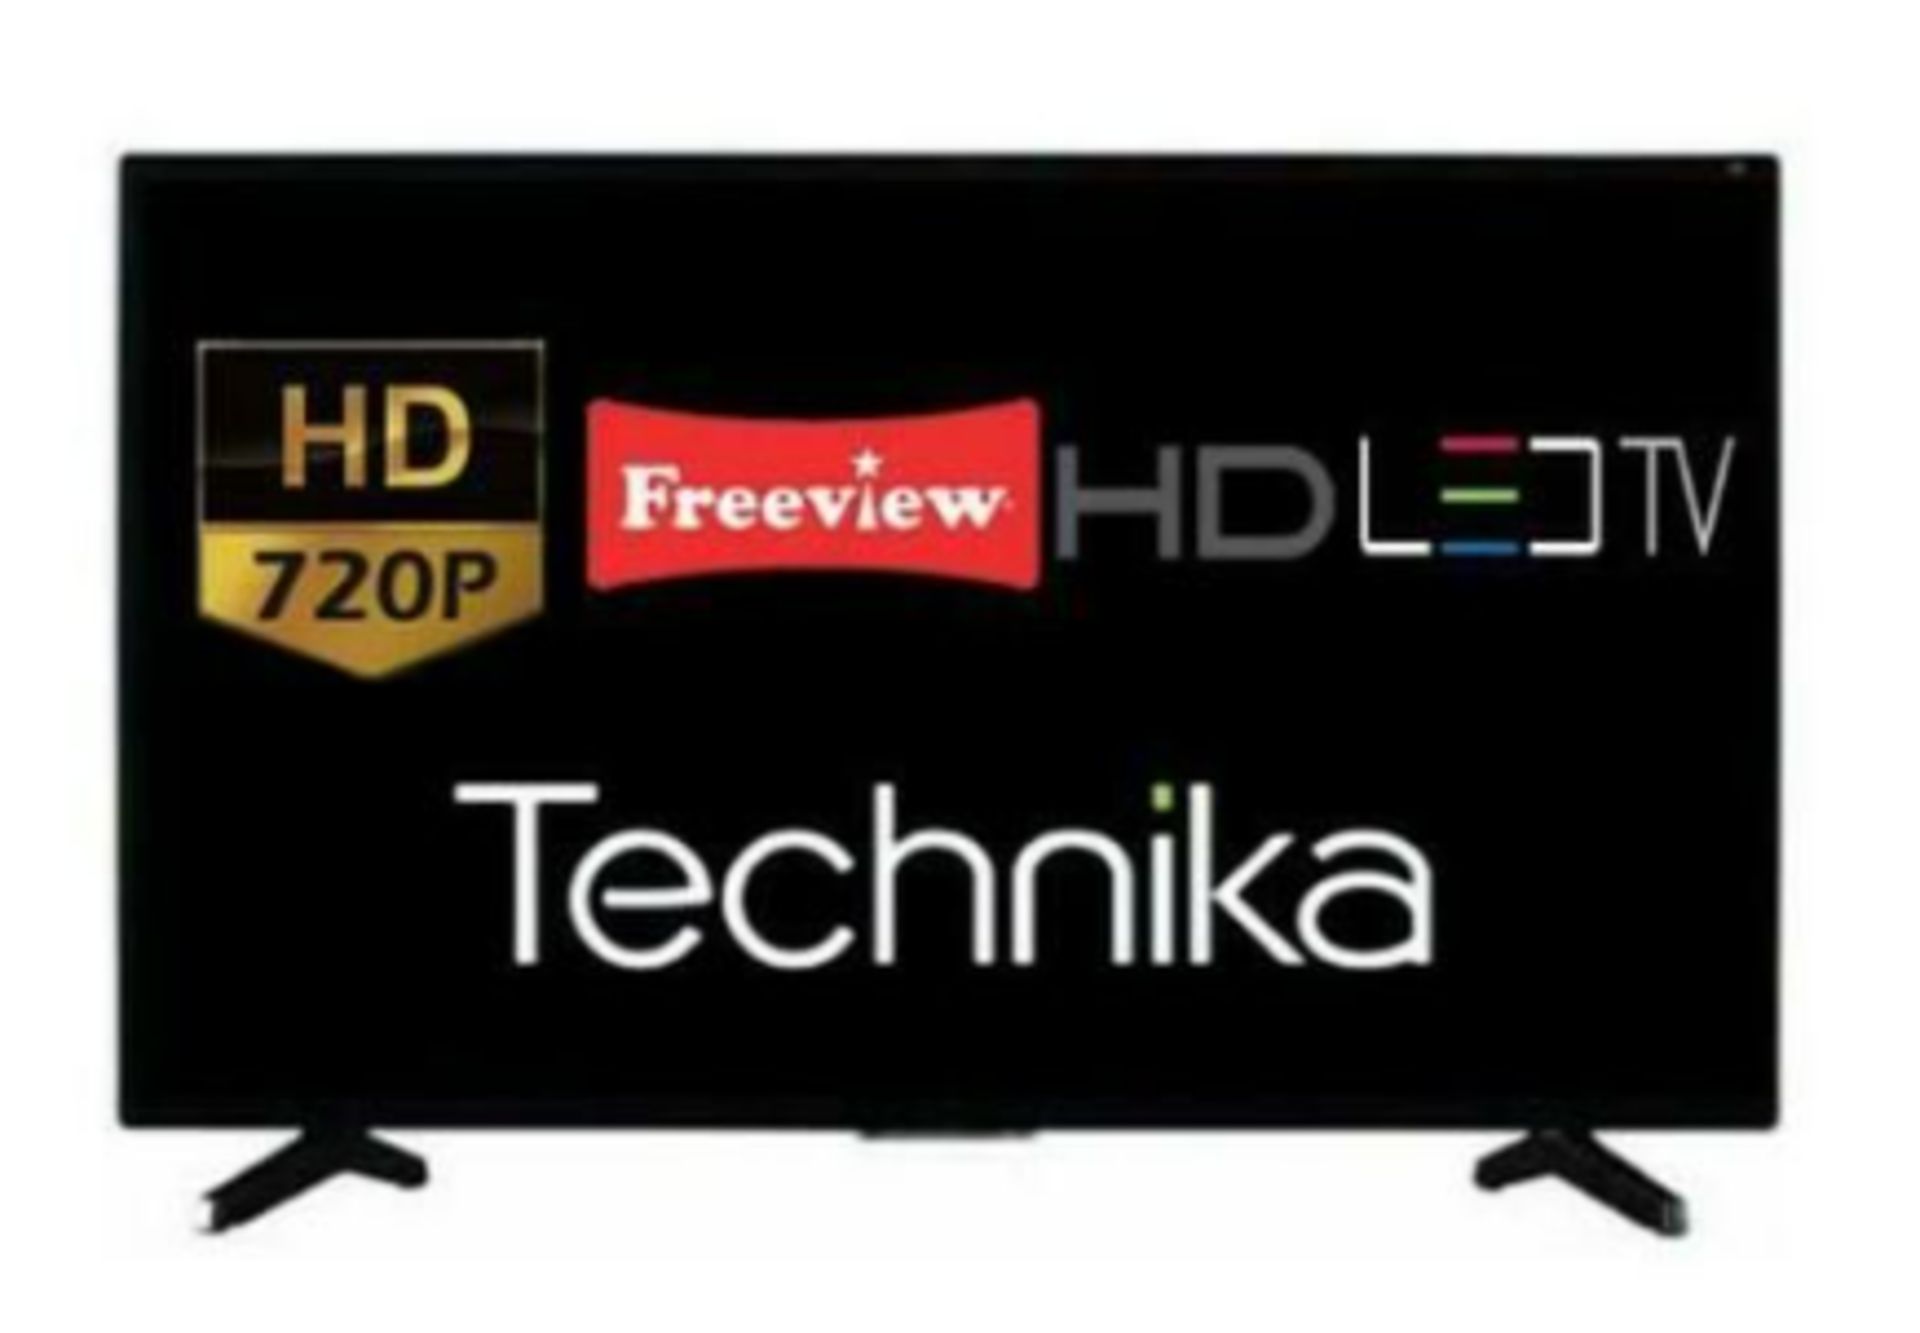 BRAND NEW AND BOXED 32" HD READY LED TV FREEVIEW HD SAORVIEW SATELLITE HD